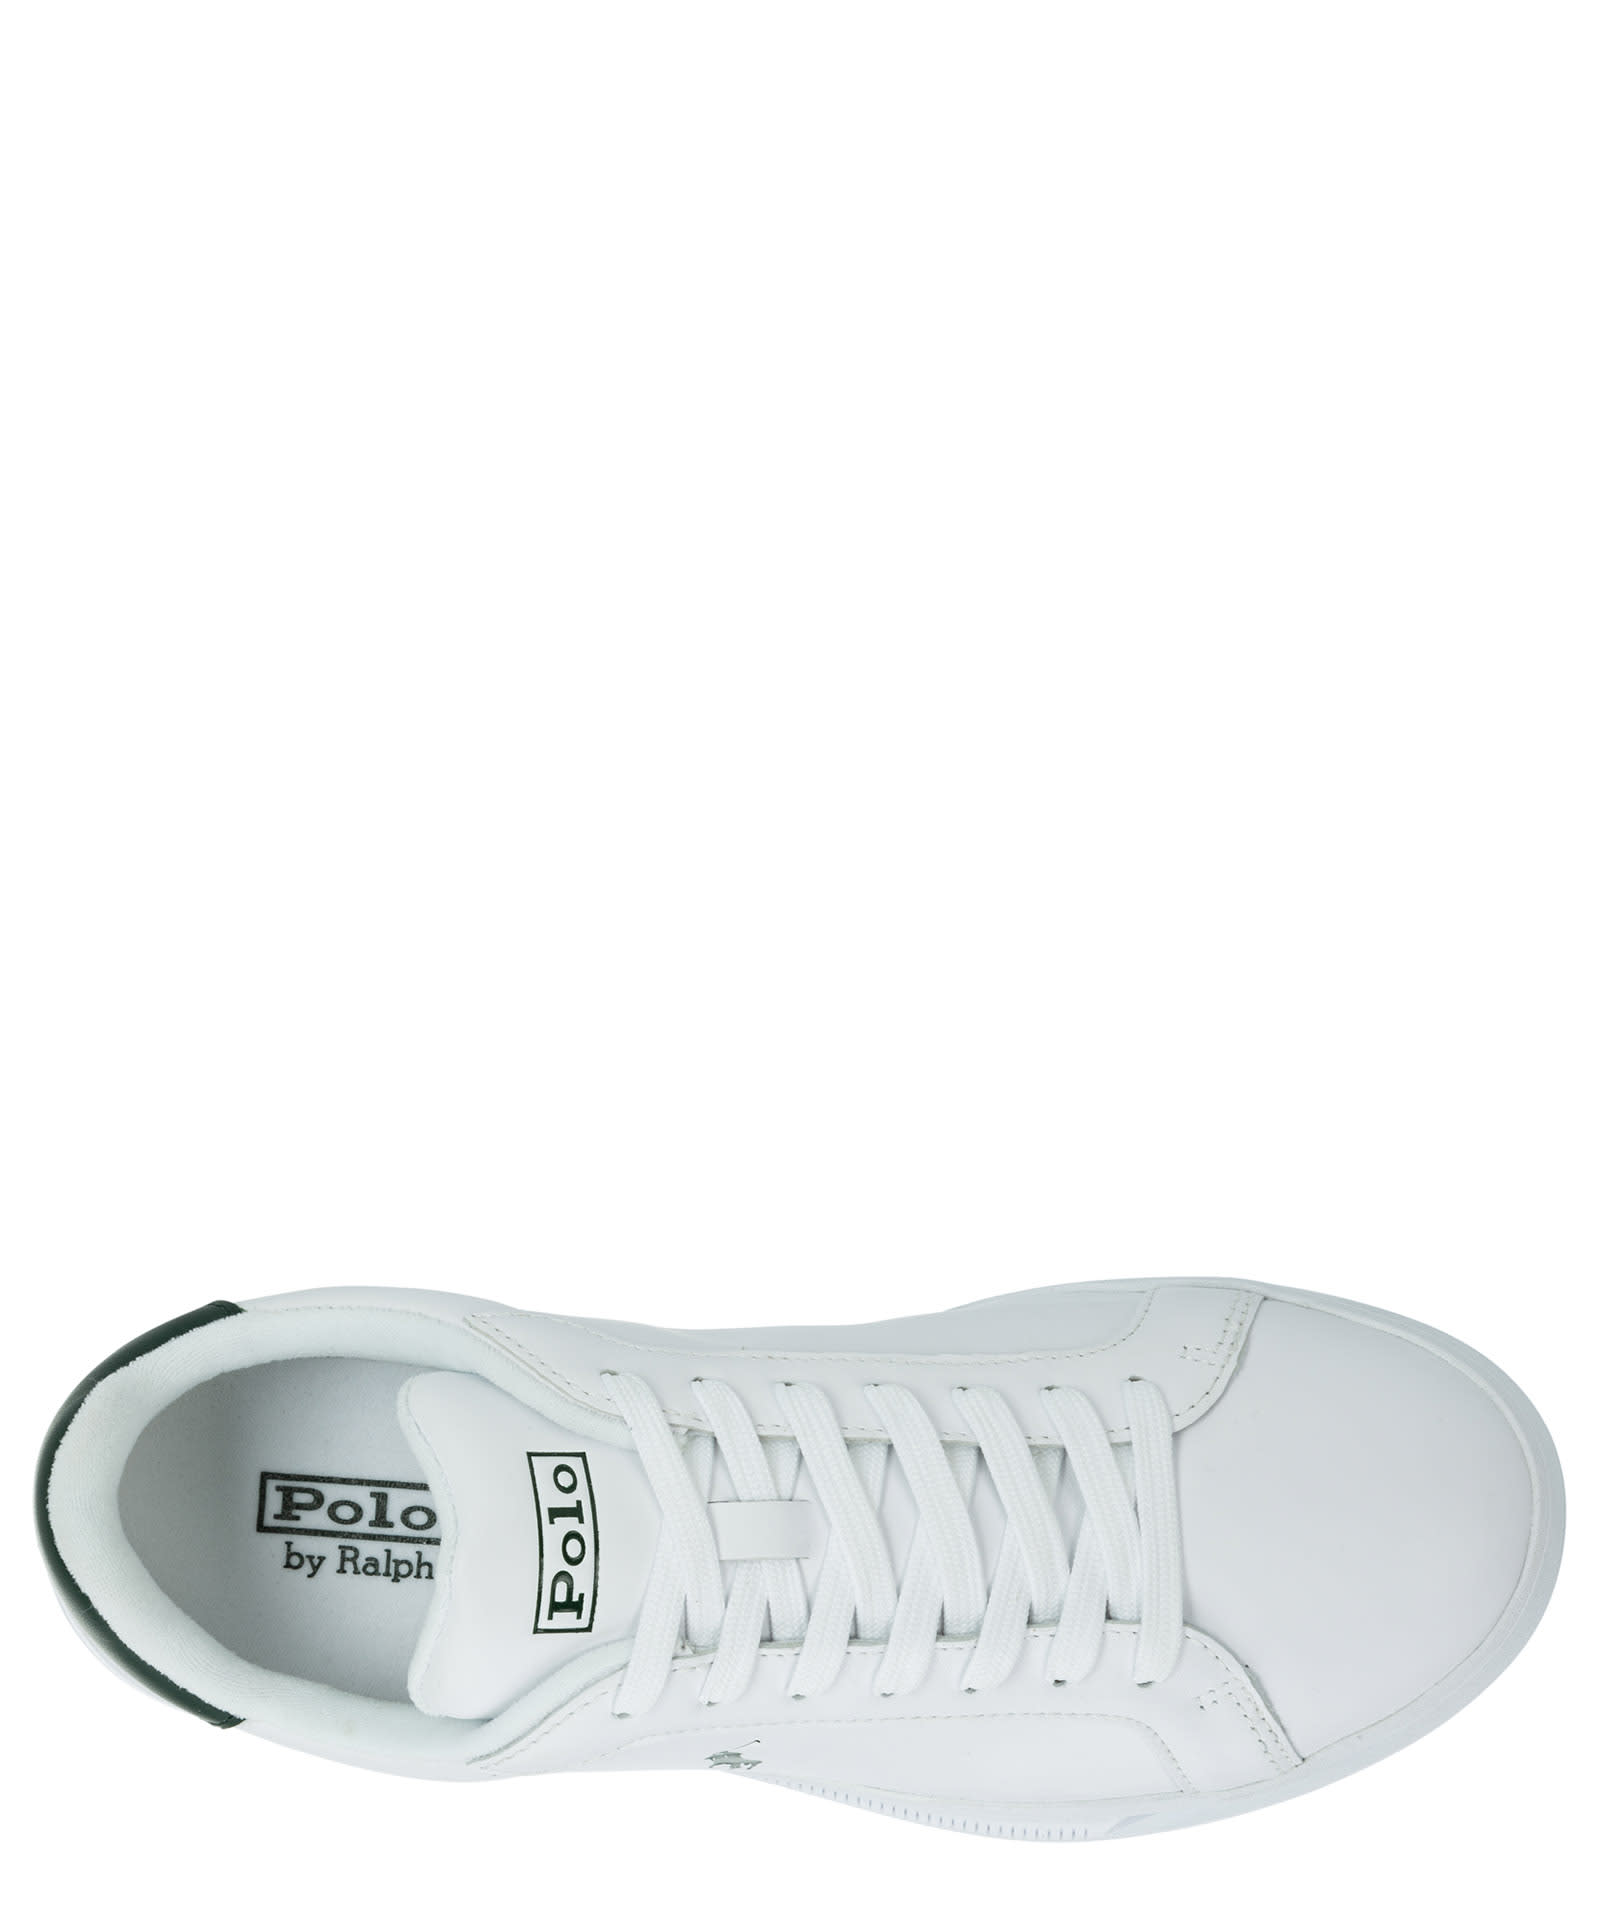 Polo Ralph Lauren Court Ii Heritage Leather Sneakers In White/green